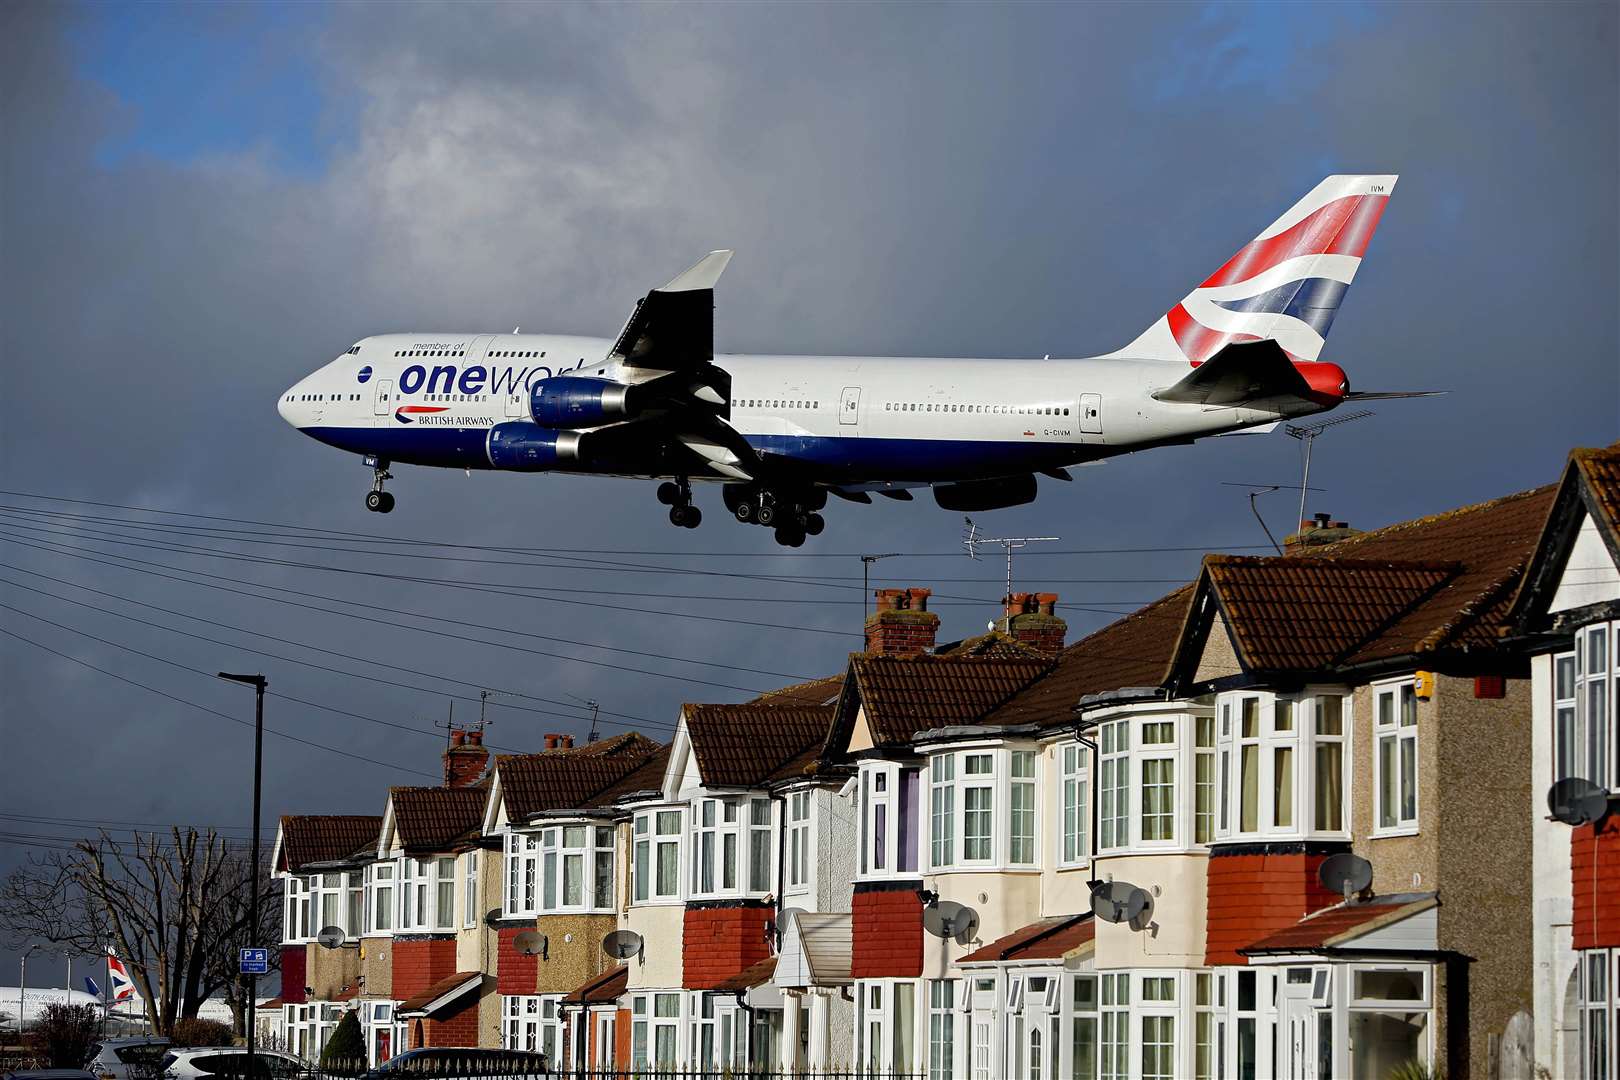 The planes have become a familiar sight in the UK skies (Steve Parsons/PA)